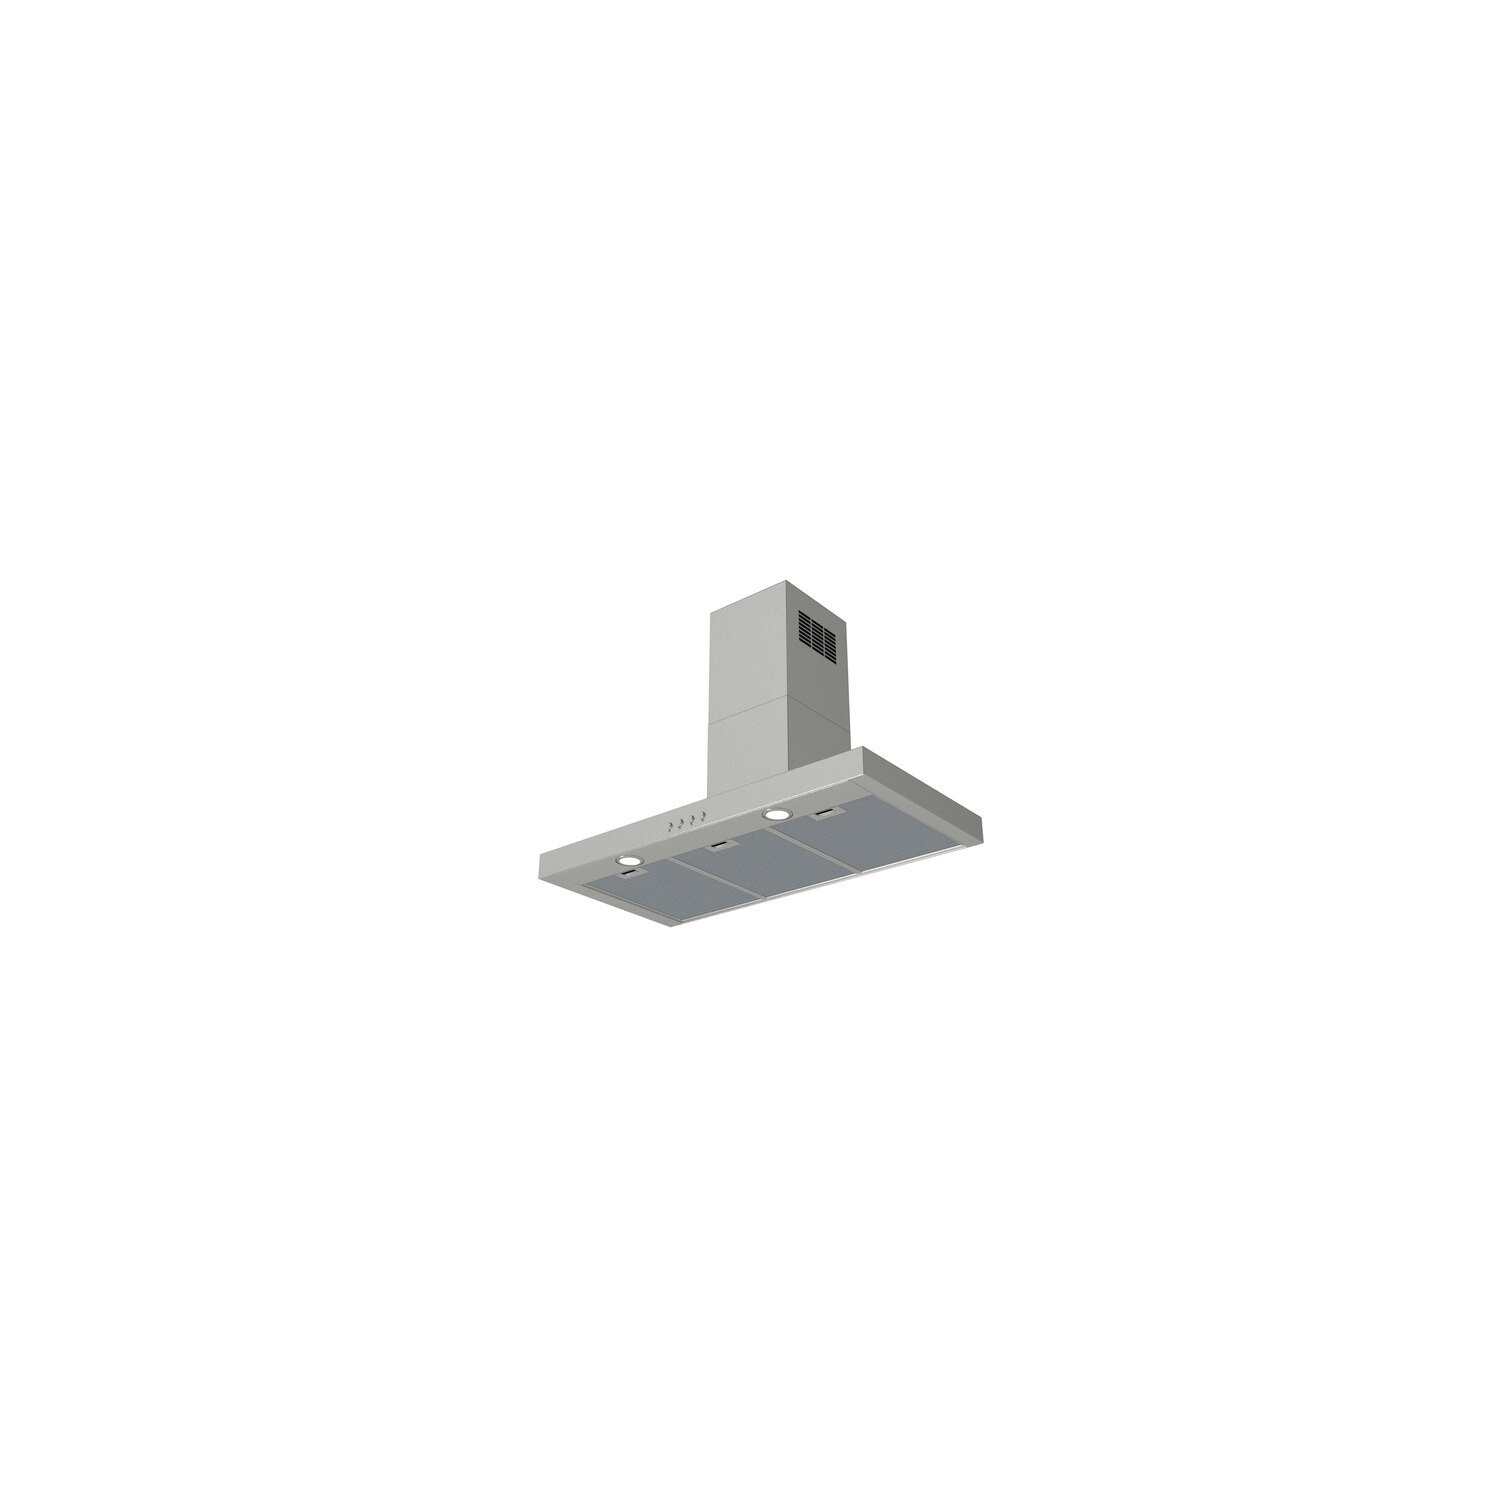 Zanussi 90cm Chimney Hood - Stainless Steel - C Rated - 1